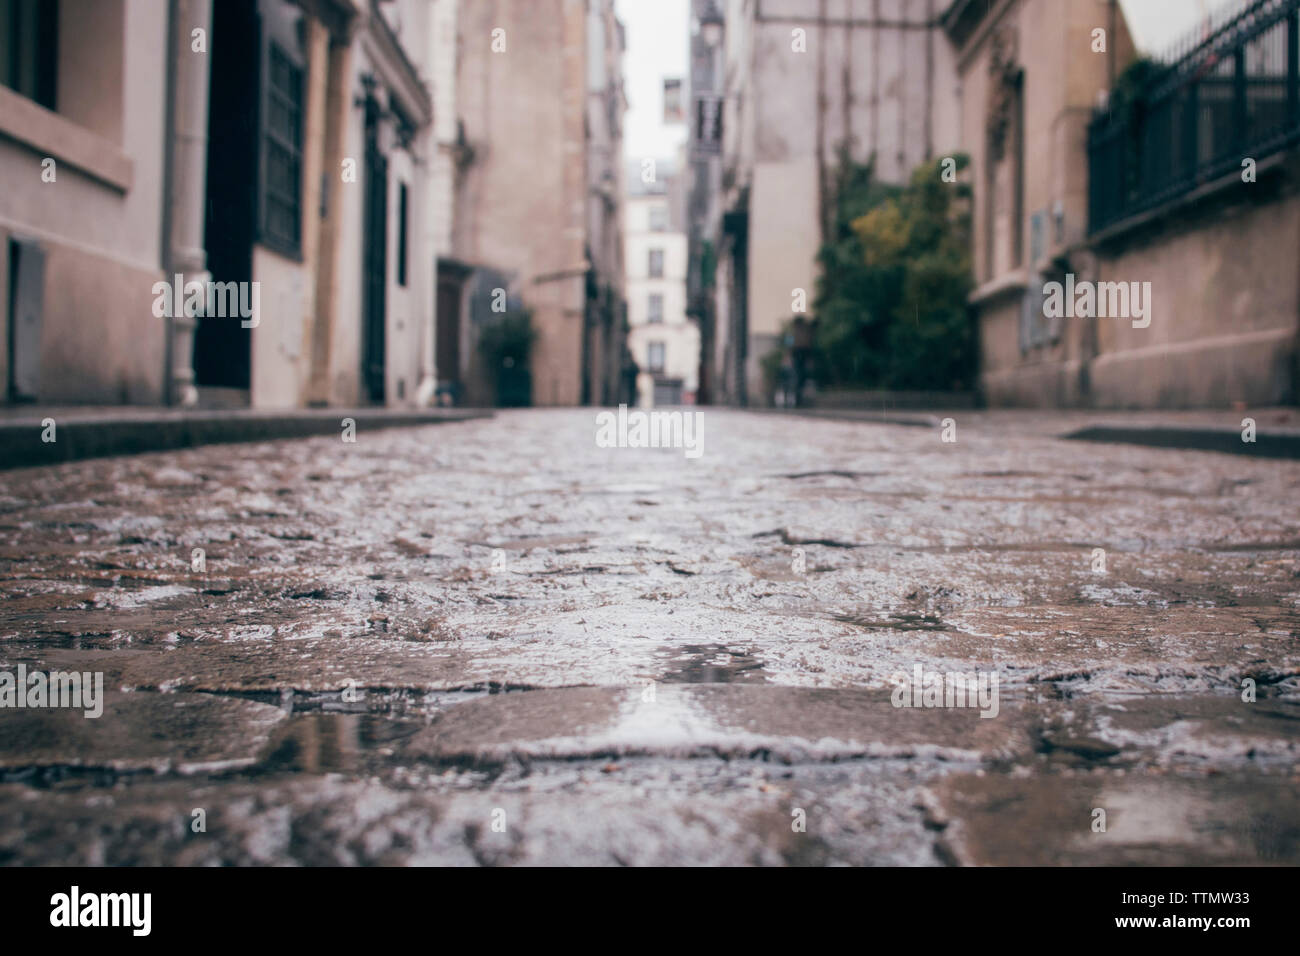 Wet empty alley amidst buildings in city during rainy season Stock Photo